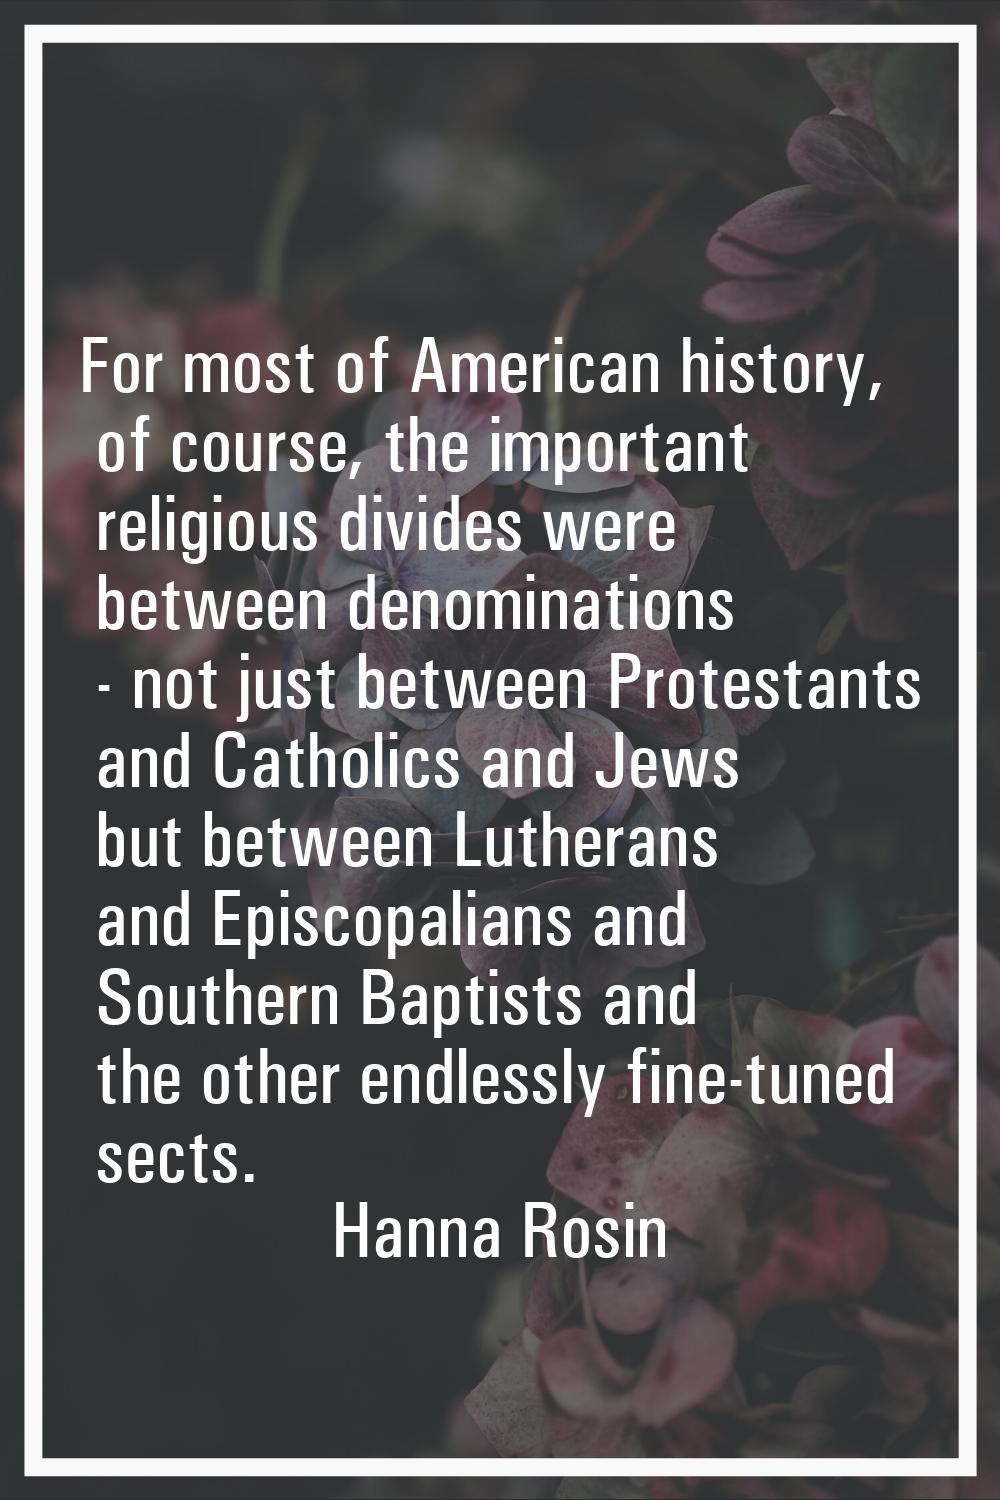 For most of American history, of course, the important religious divides were between denominations